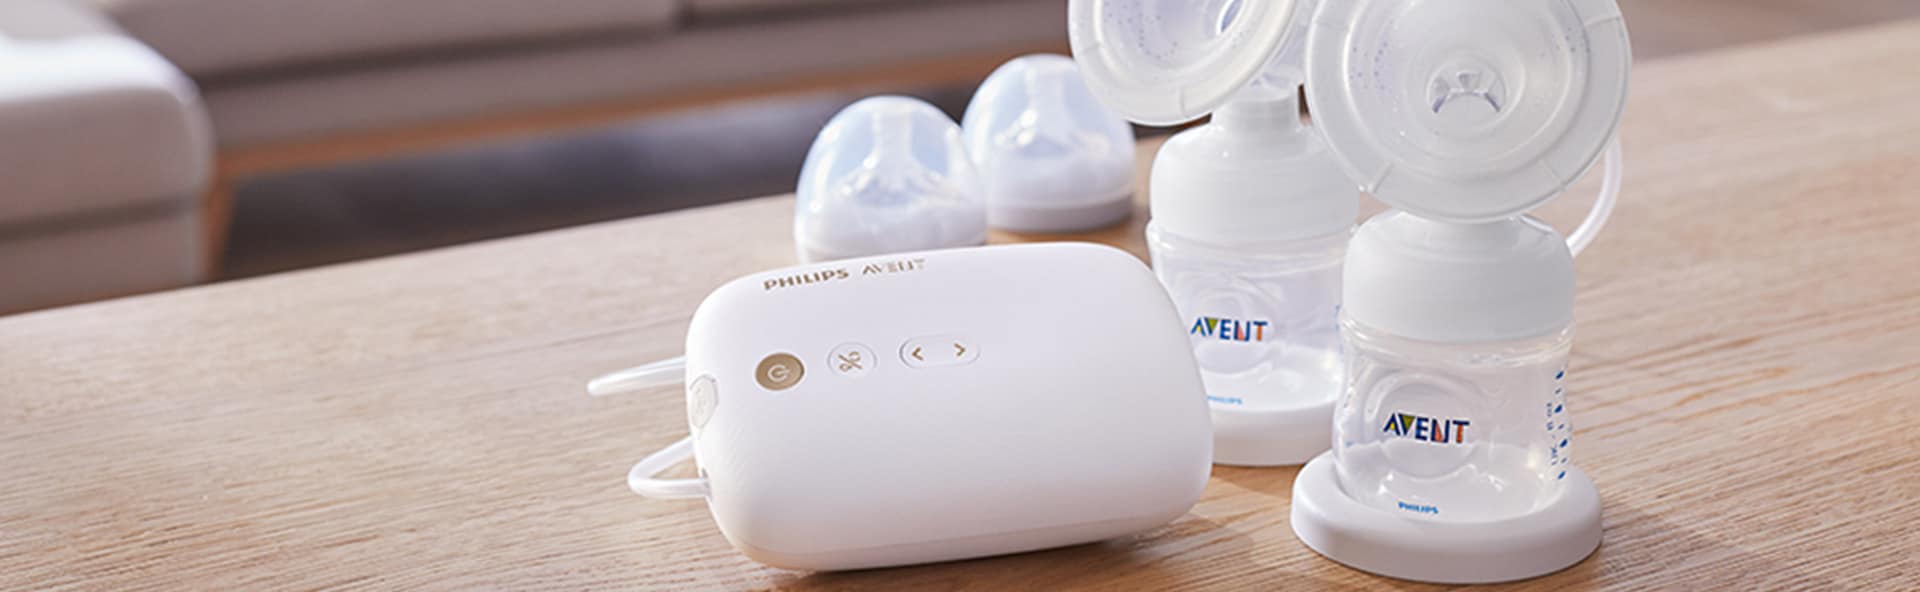 Philips breast pump products on a table